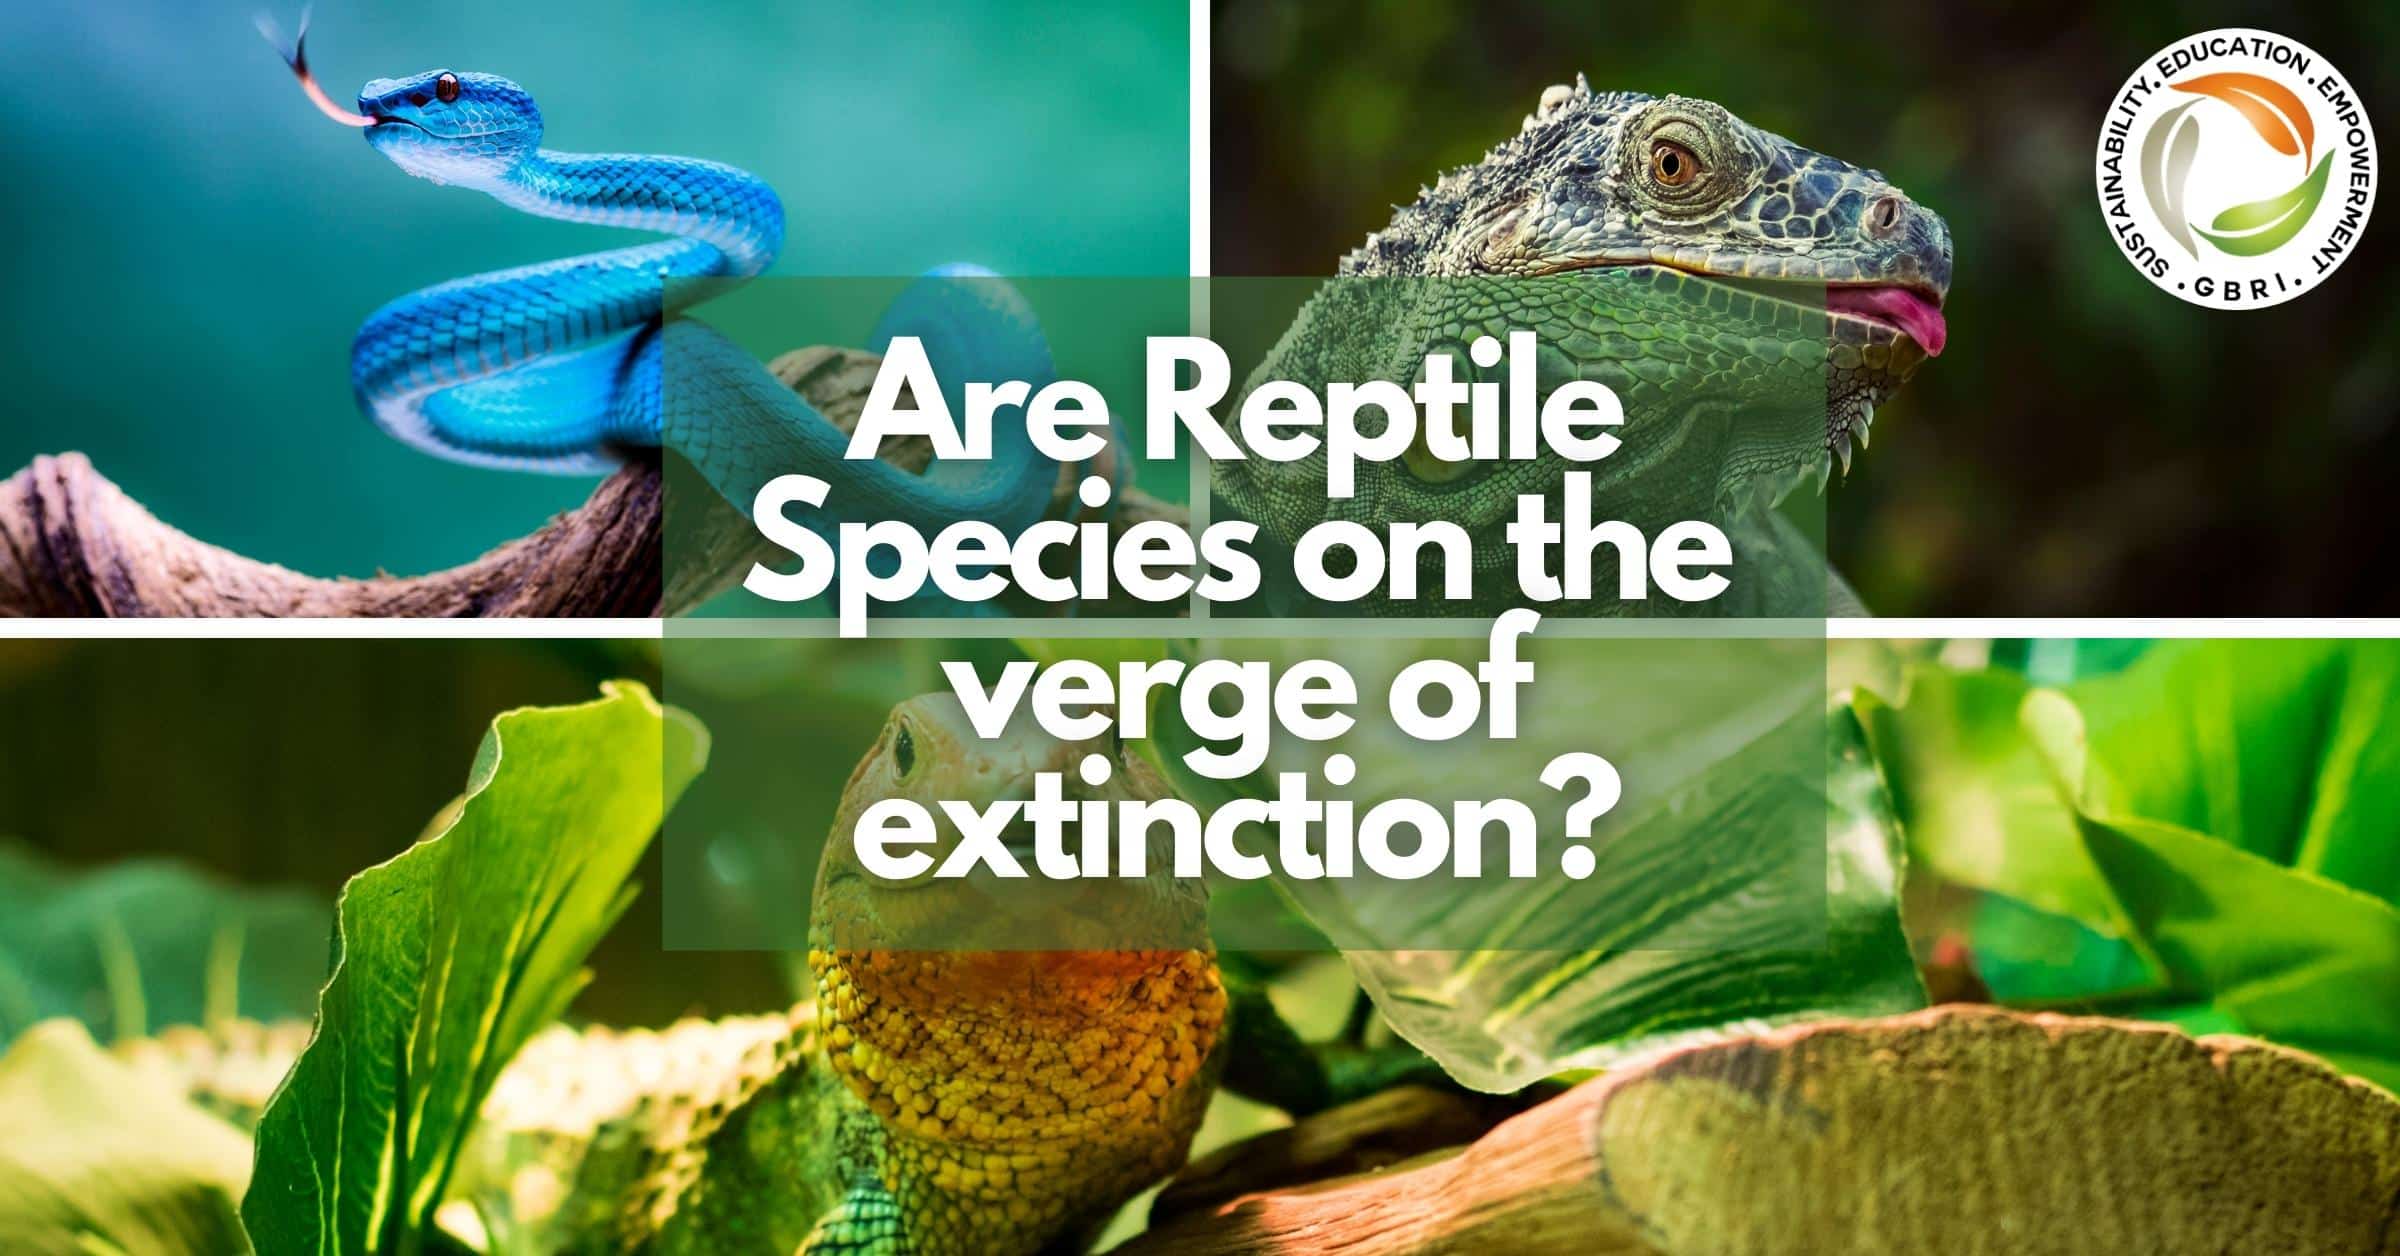 Are reptile species on the verge of extinction?